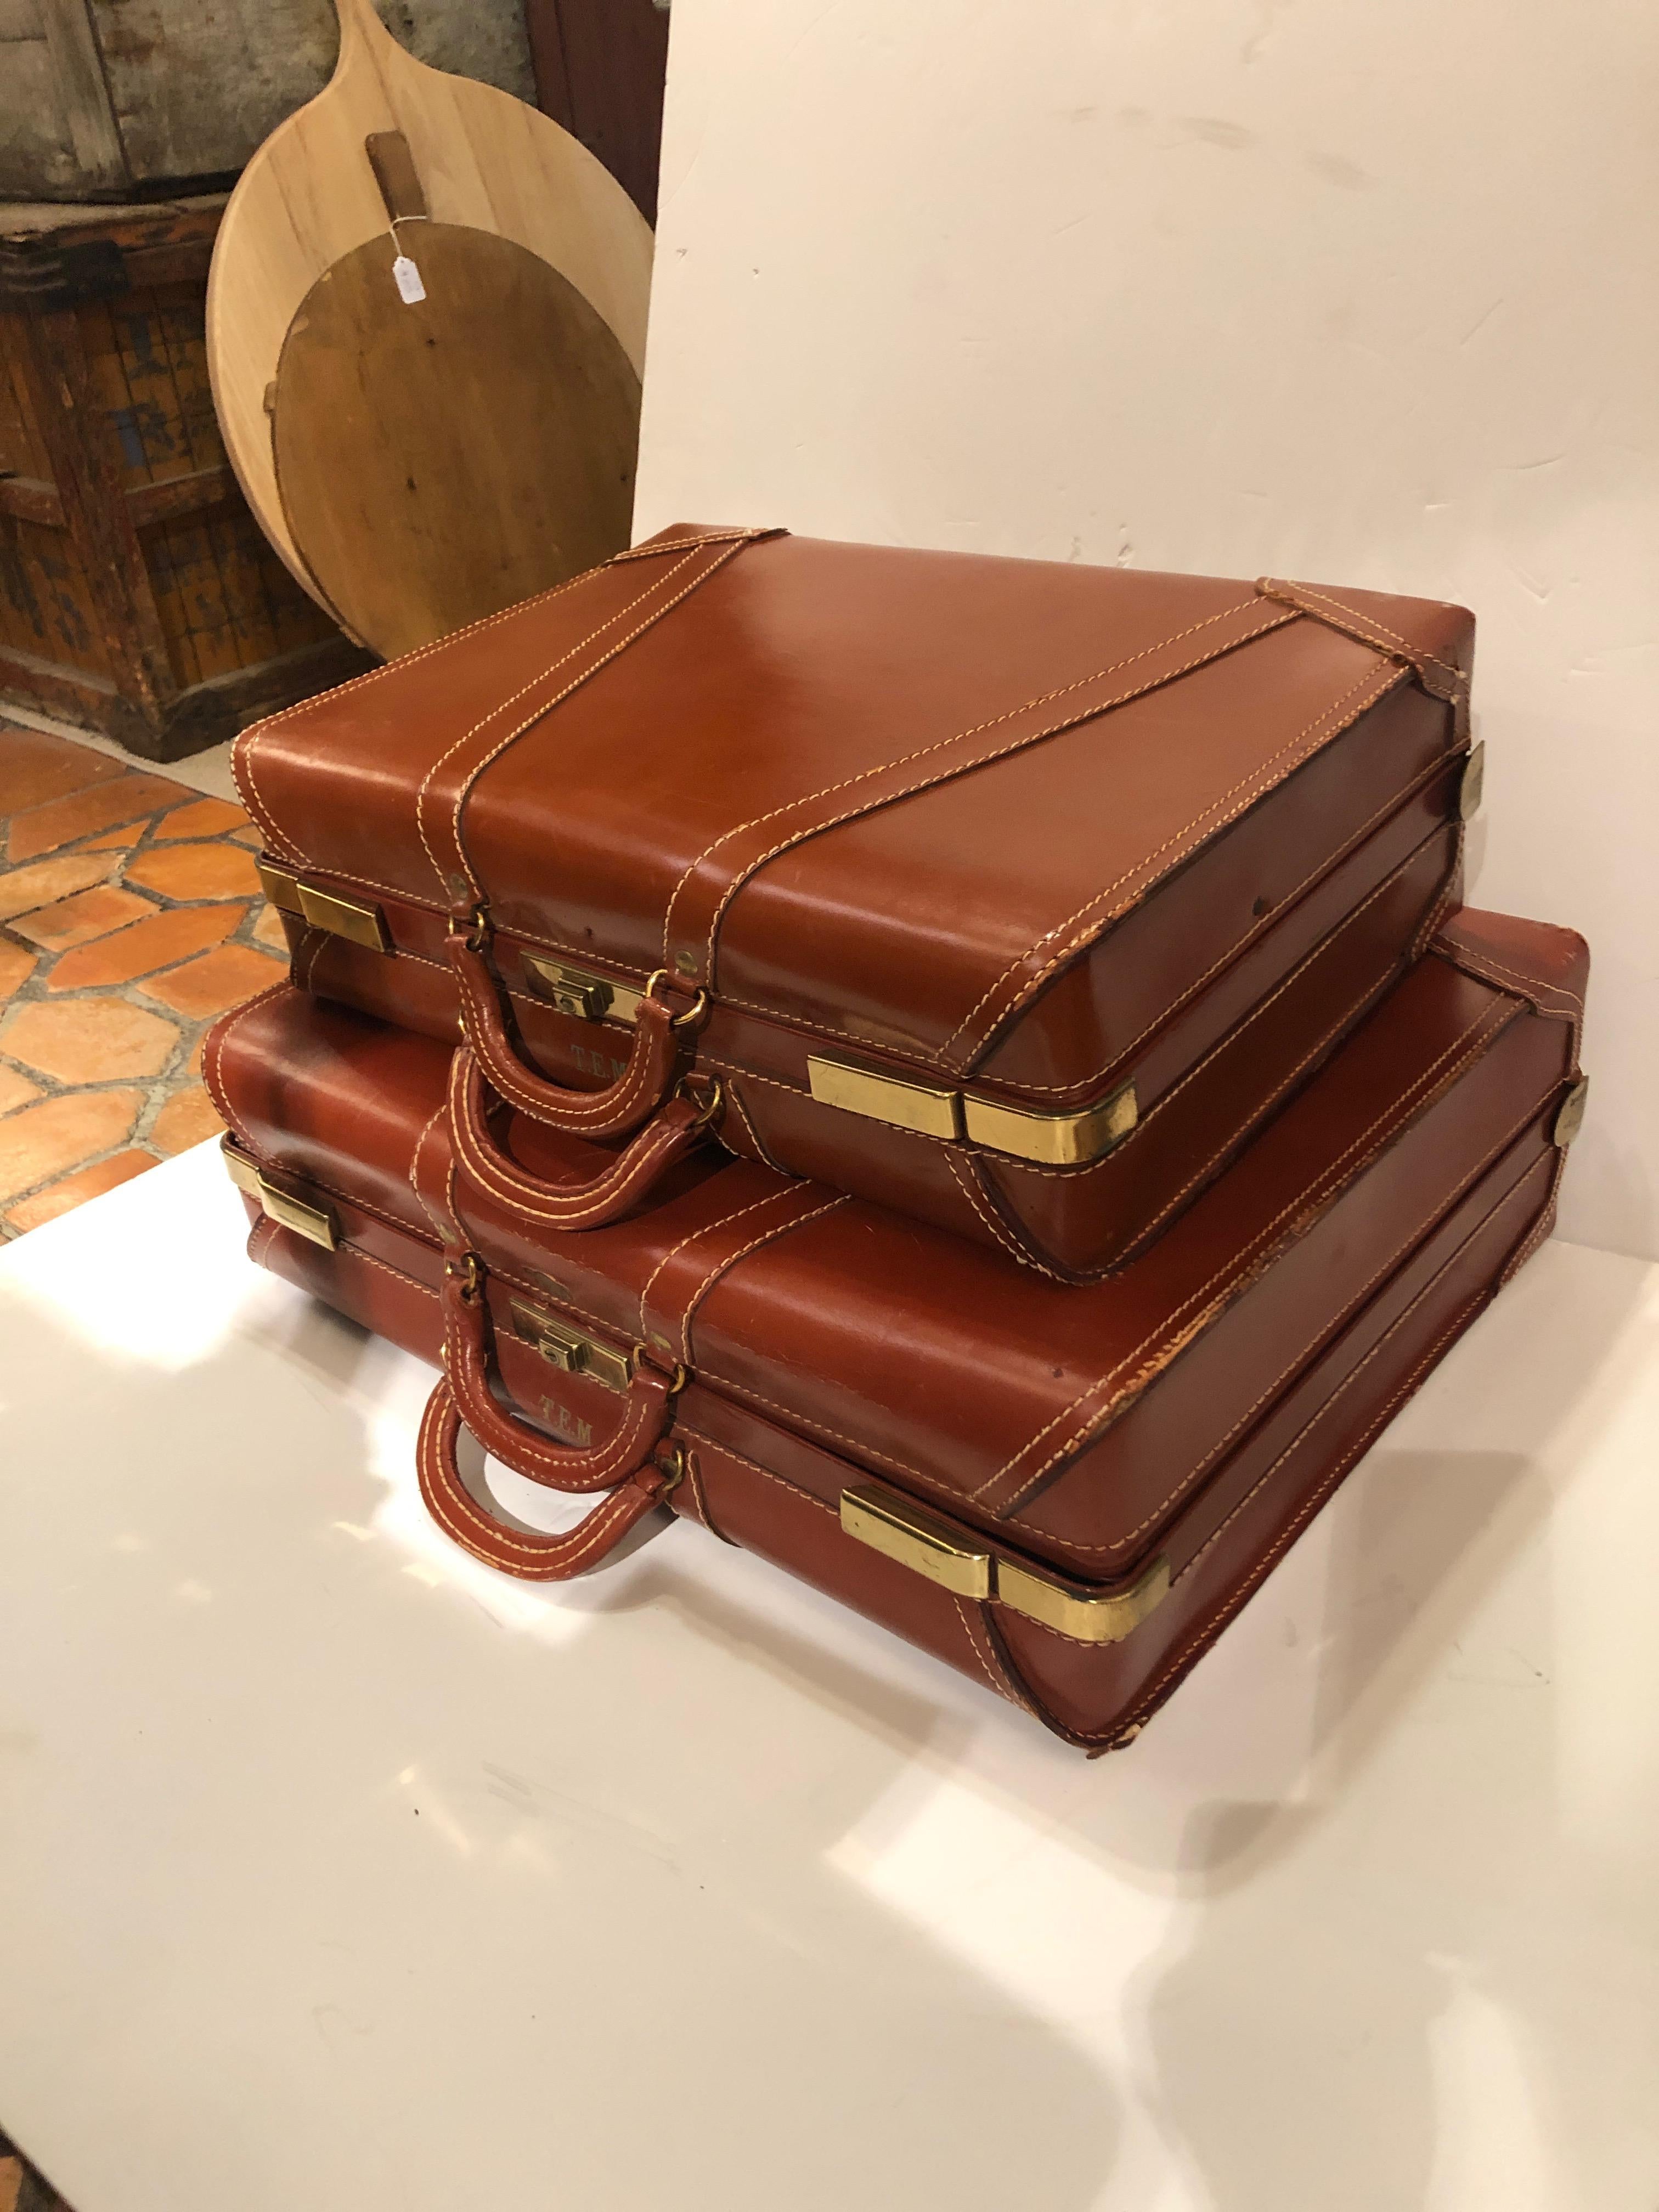 A handsome pair of authentic leather and brass vintage suitcases that add a touch of nostalgic accessorizing. Stacked they look great and function as a coffee table or end table.
Smaller suitcase is 21 W, 14.5 H, 6 D.